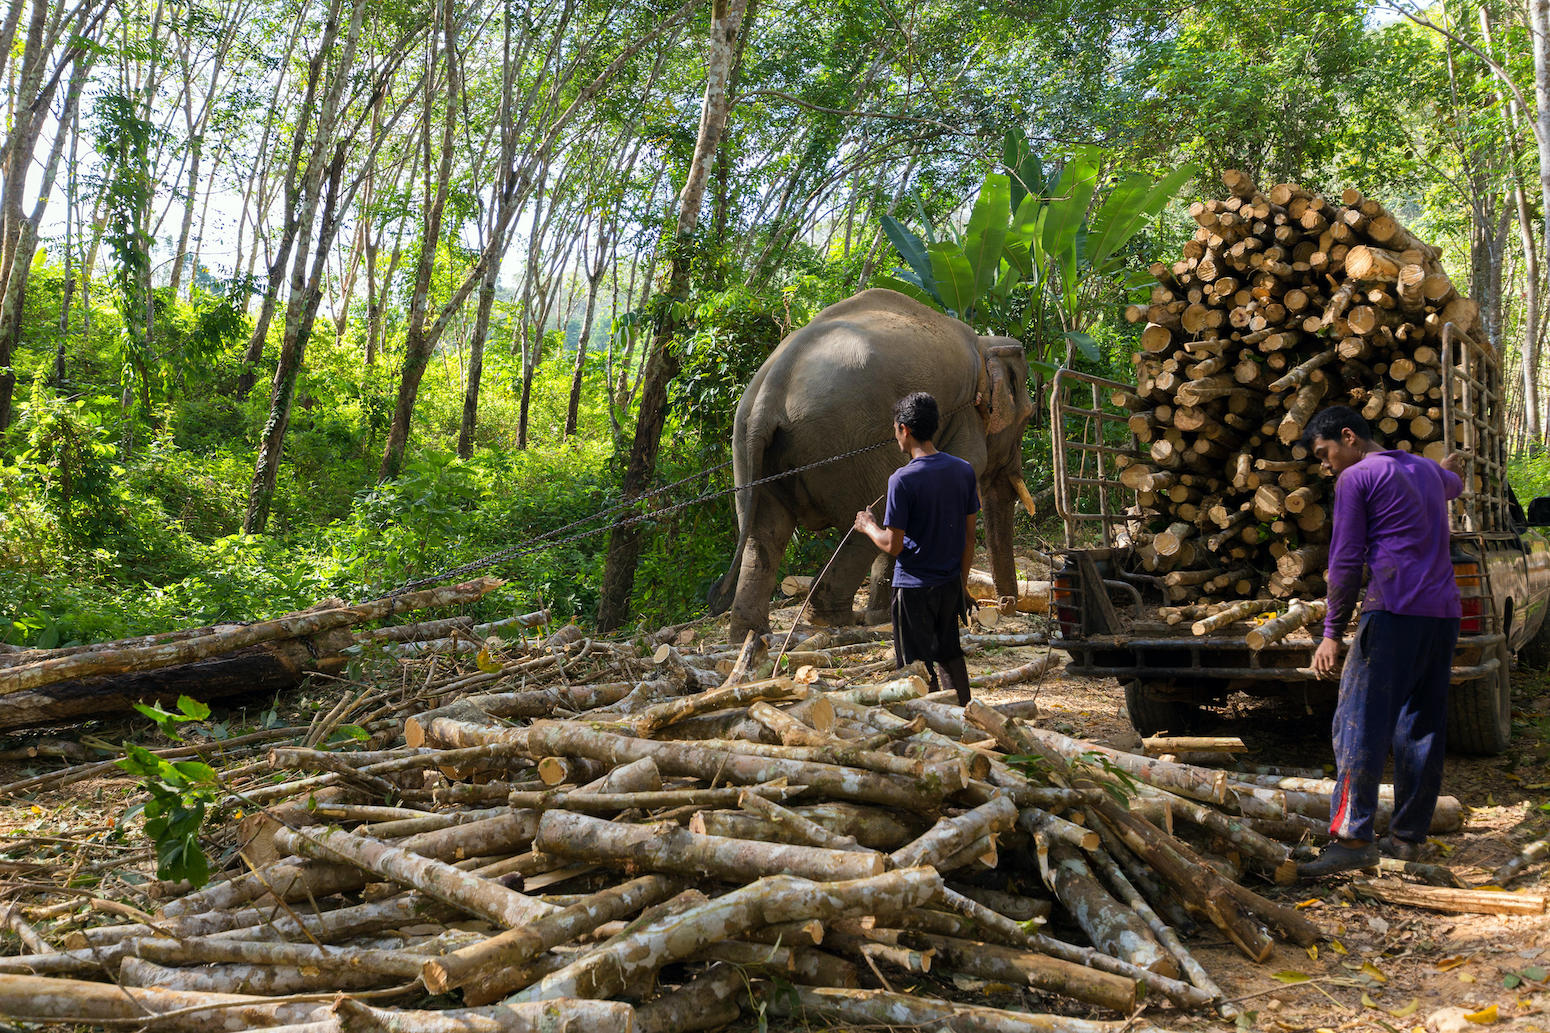 Elephants being used for deforestation in Thailand